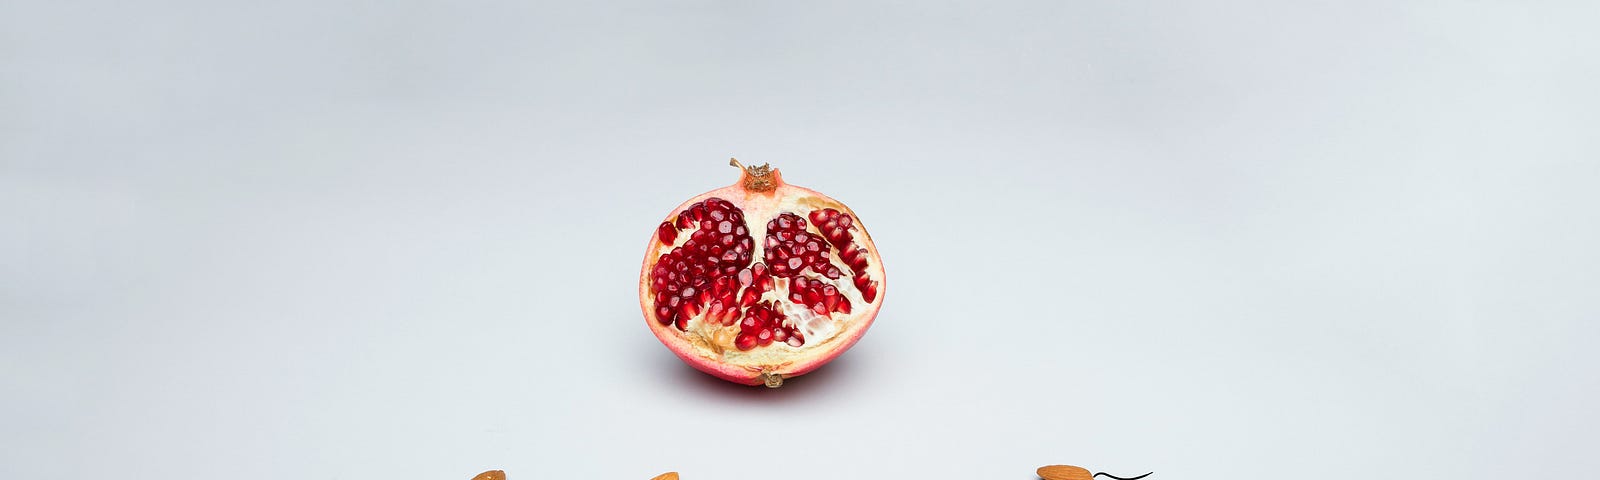 An open pomegranate with almonds that look like tadpoles swimming towards it. It’s a depiction of ‘sperm swimming to the egg’ to fertilise it.